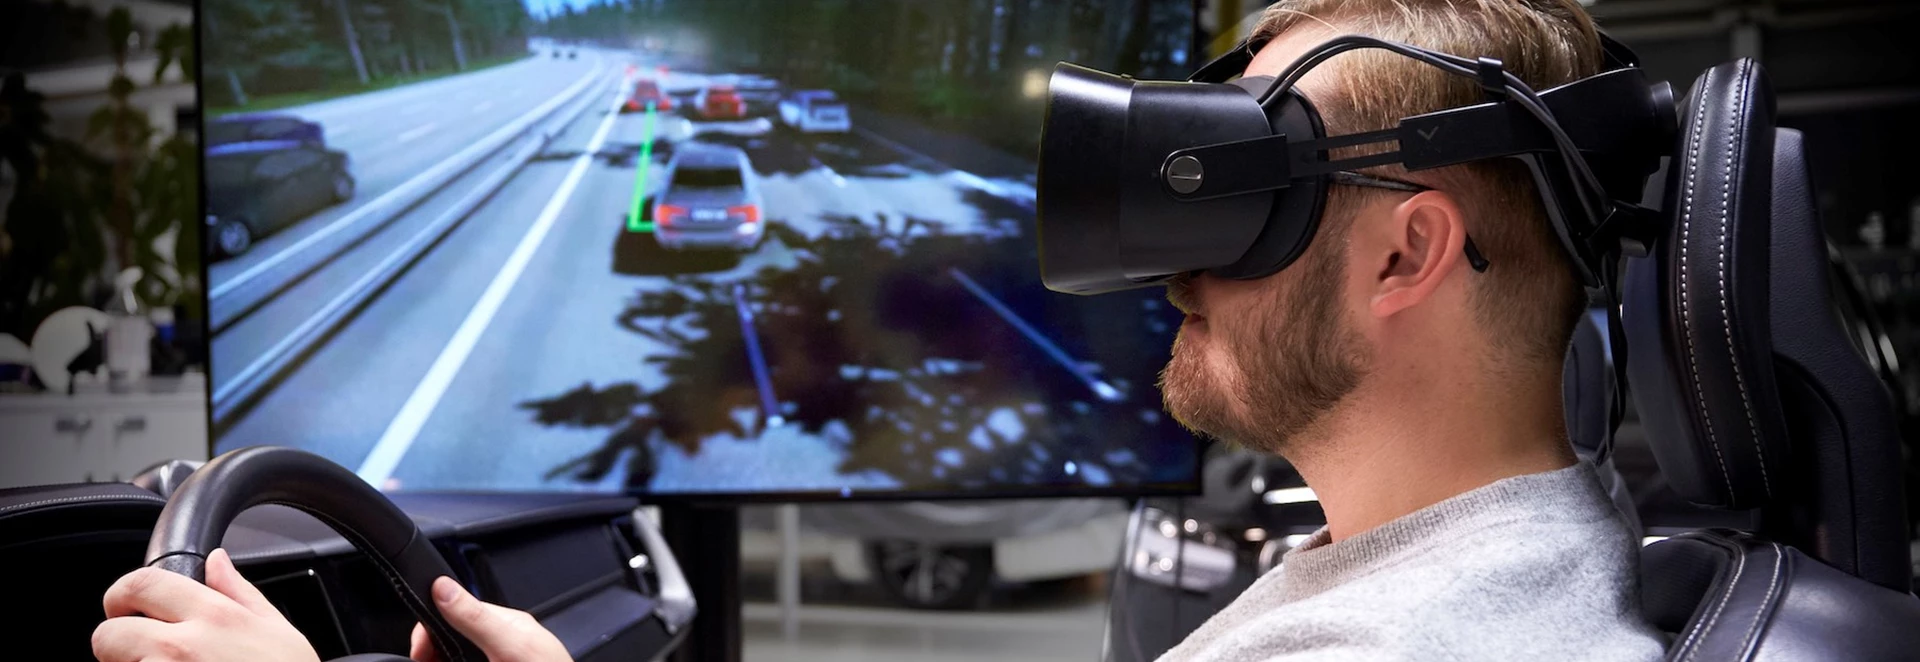 Volvo uses video game technology to help develop safer cars 